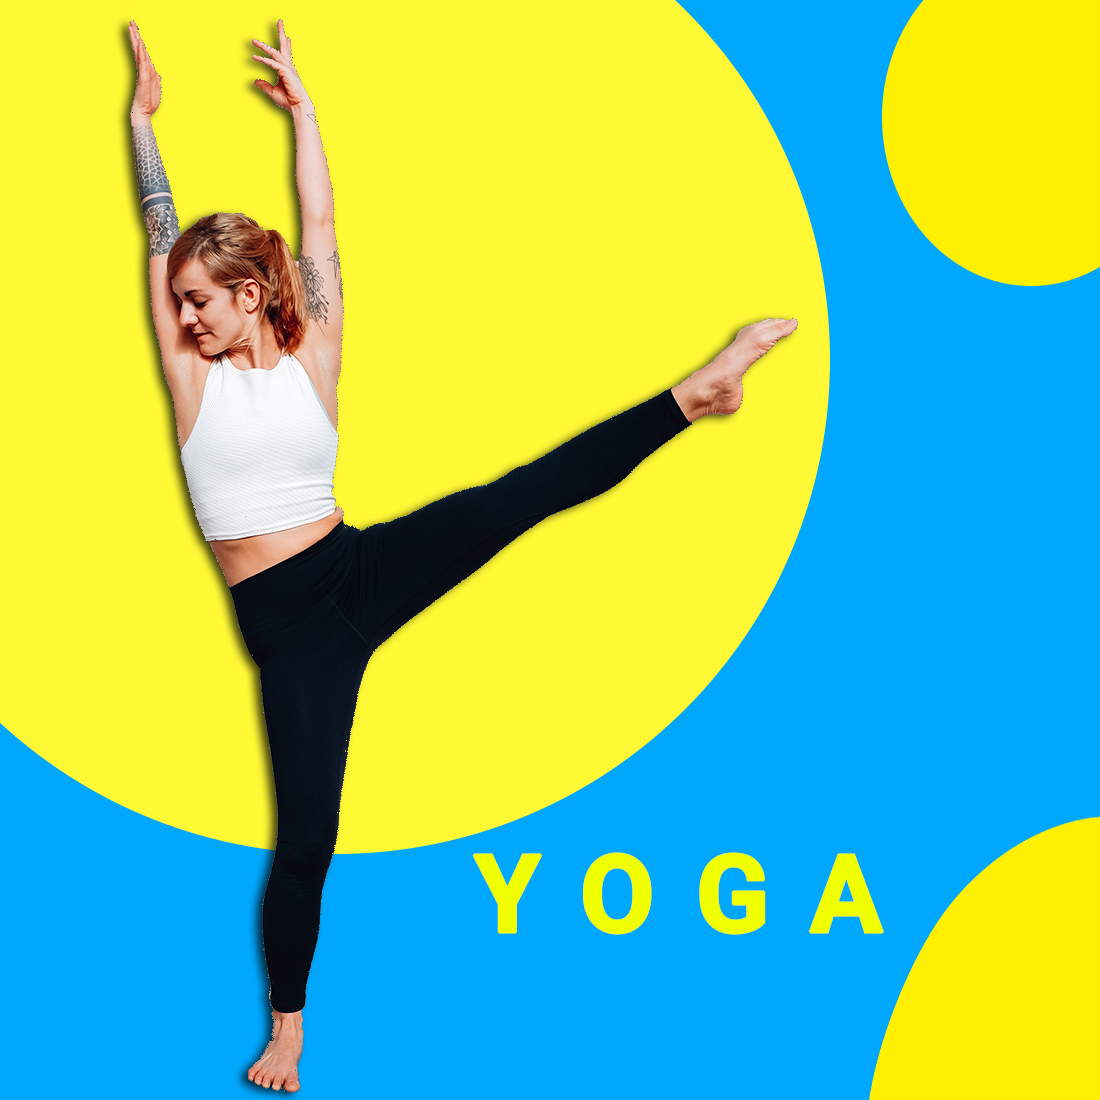 Yoga Poster Design created by muneeb123.